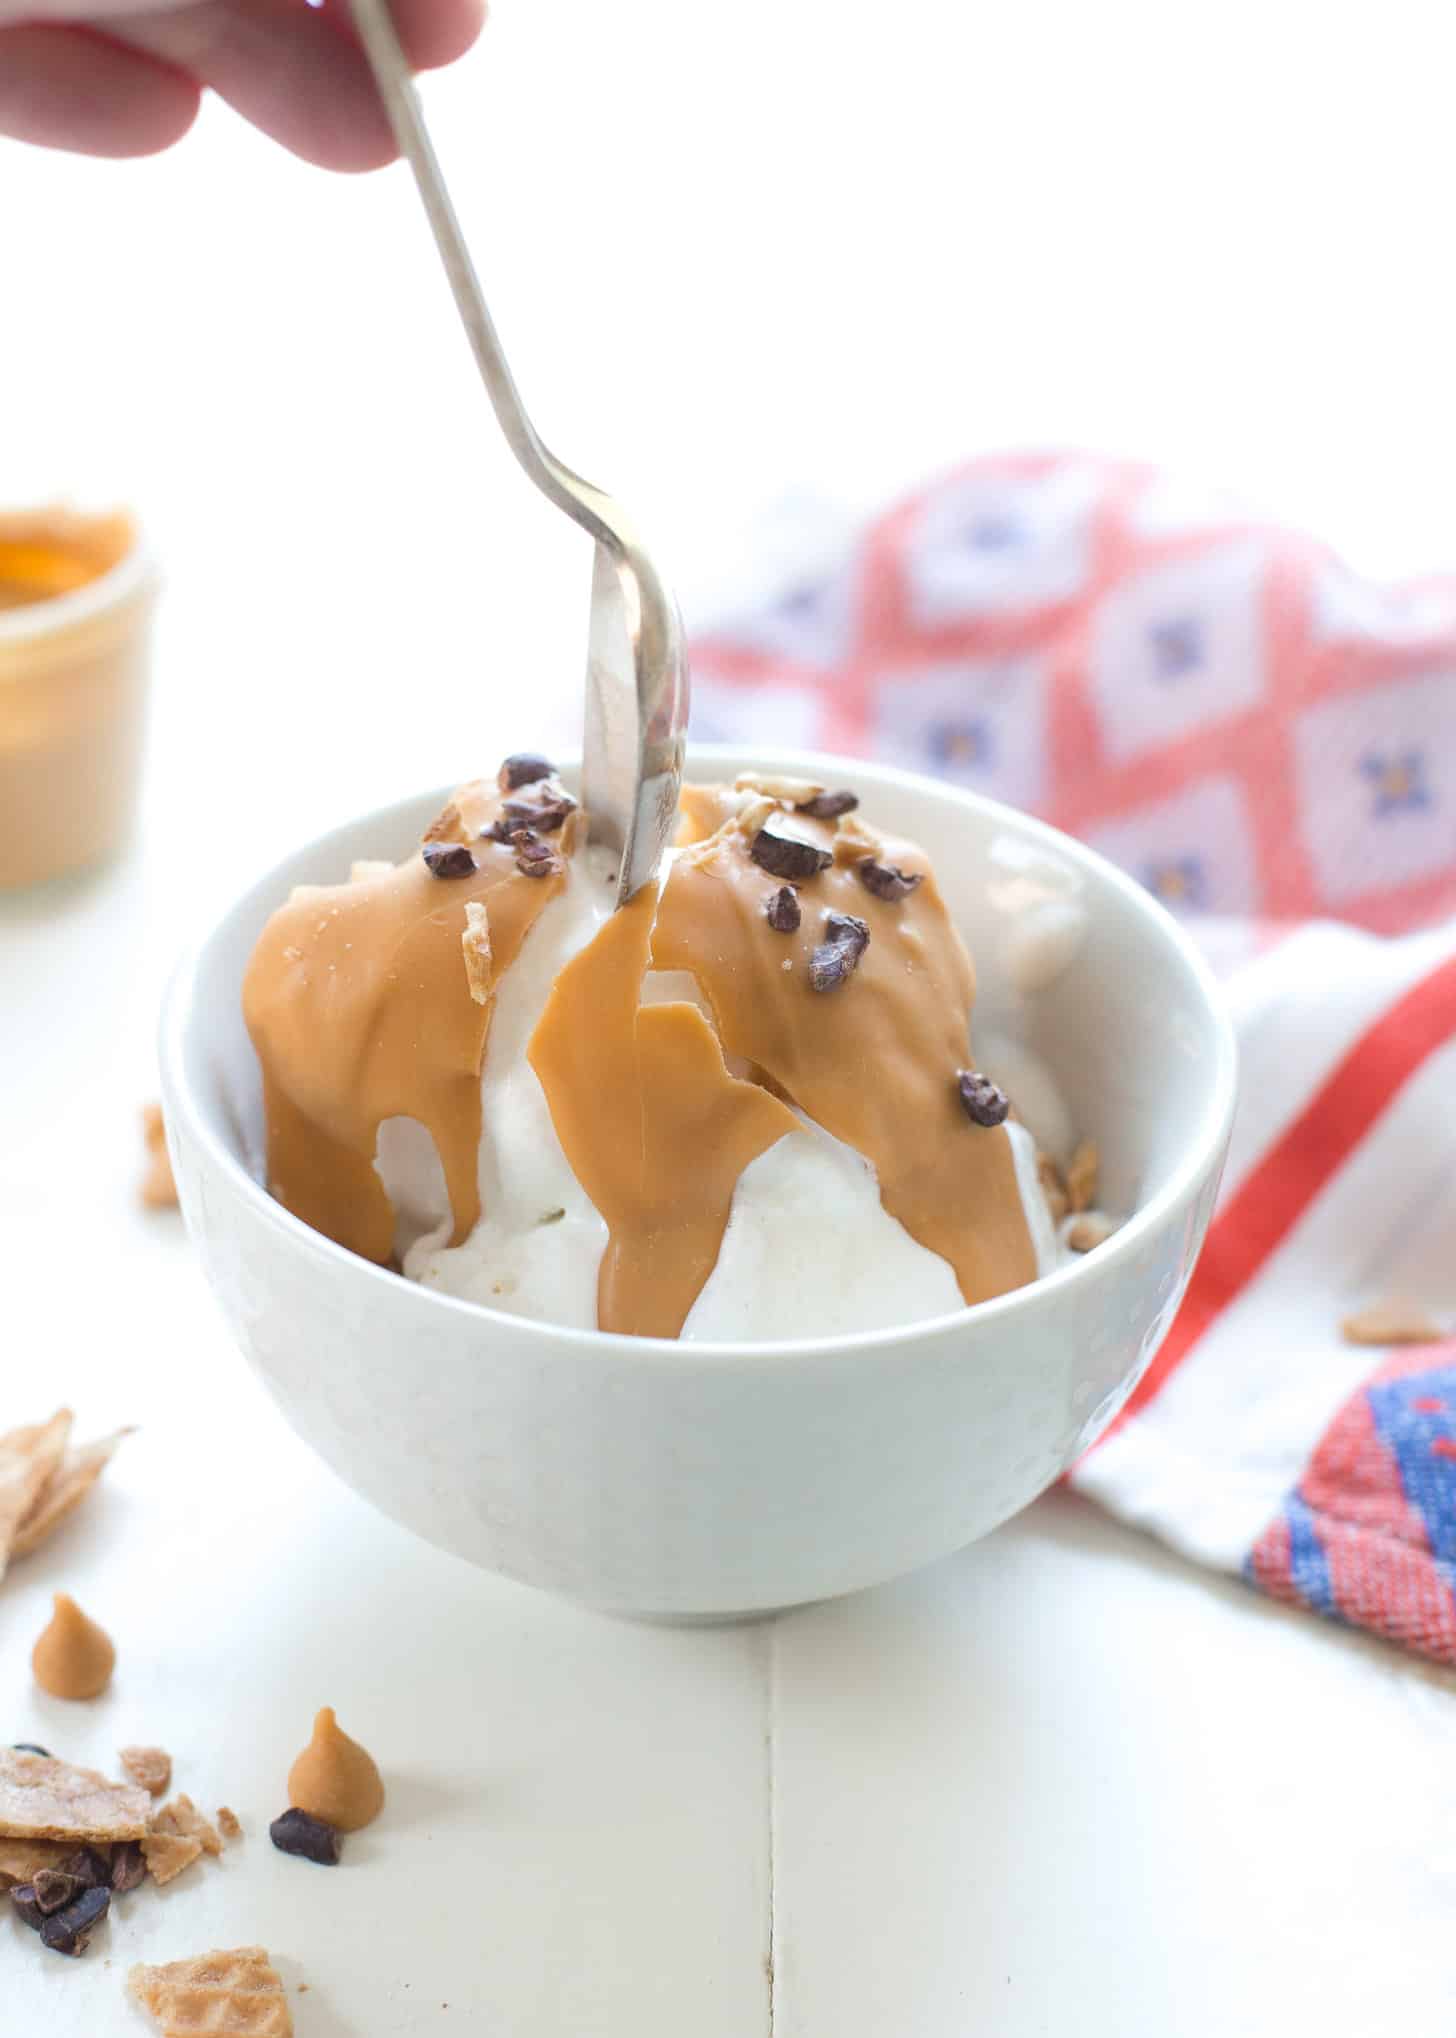 eating ice cream with butterscotch sauce